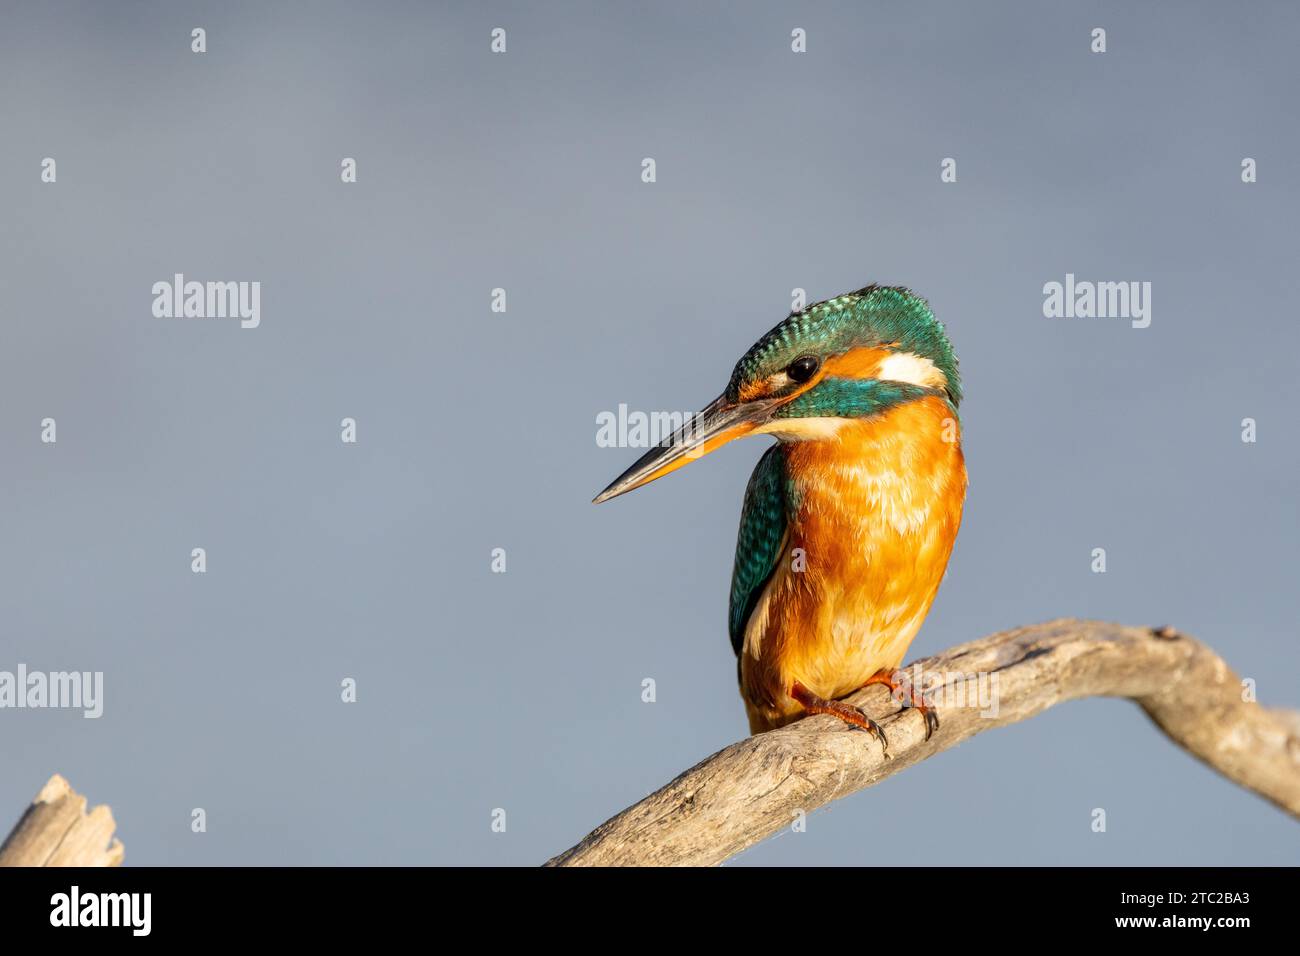 The beauty of the kingfisher in Cabras, Sardinia Stock Photo